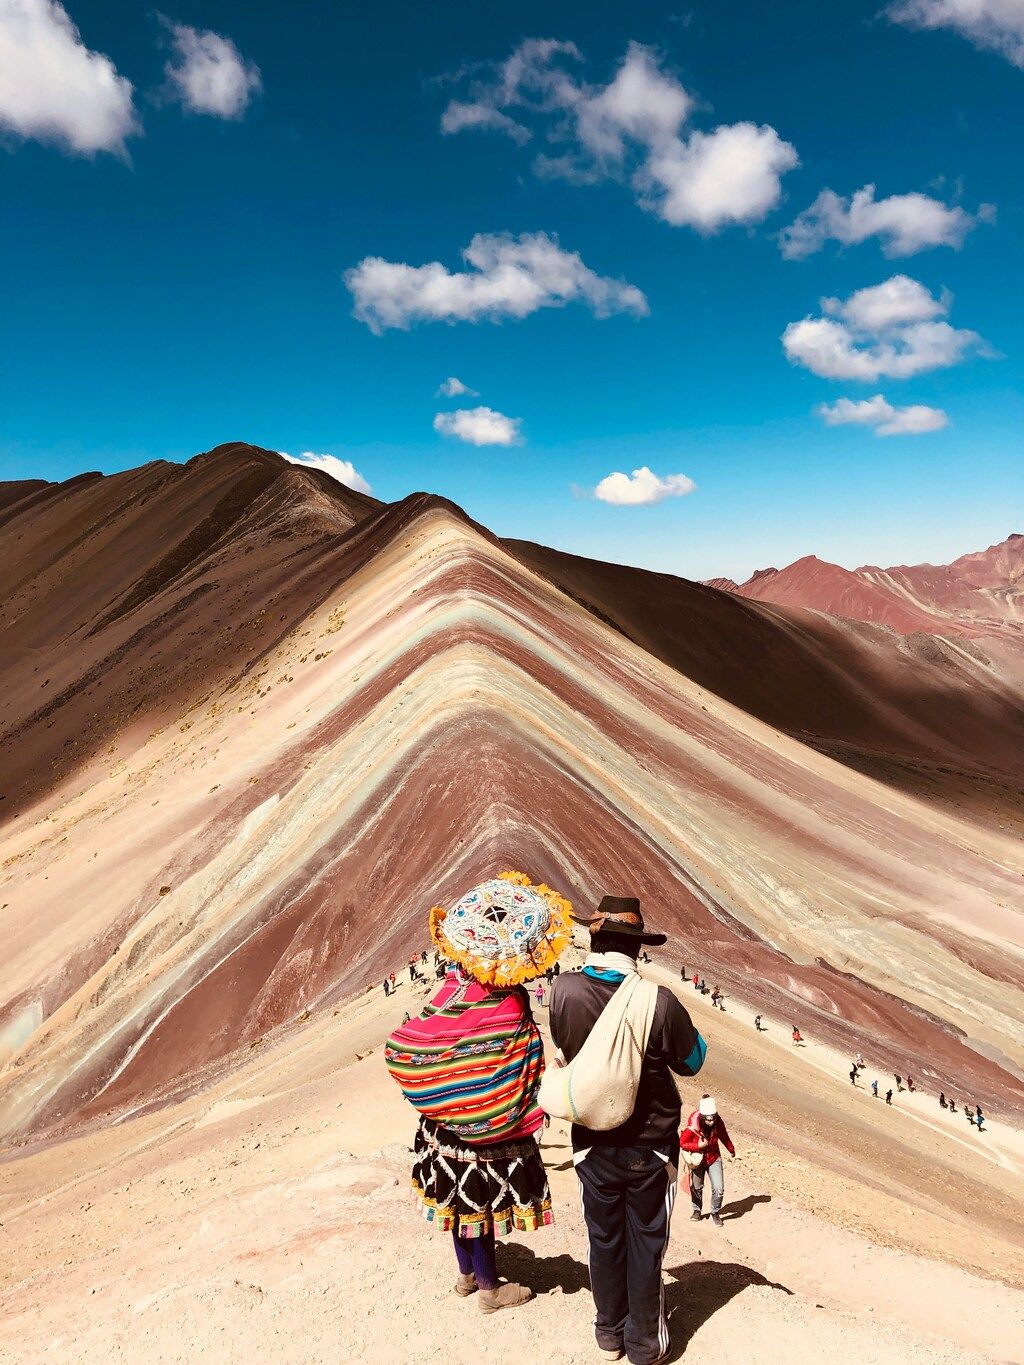 Rainbow Mountain with tourists in traditional clothing, Peru